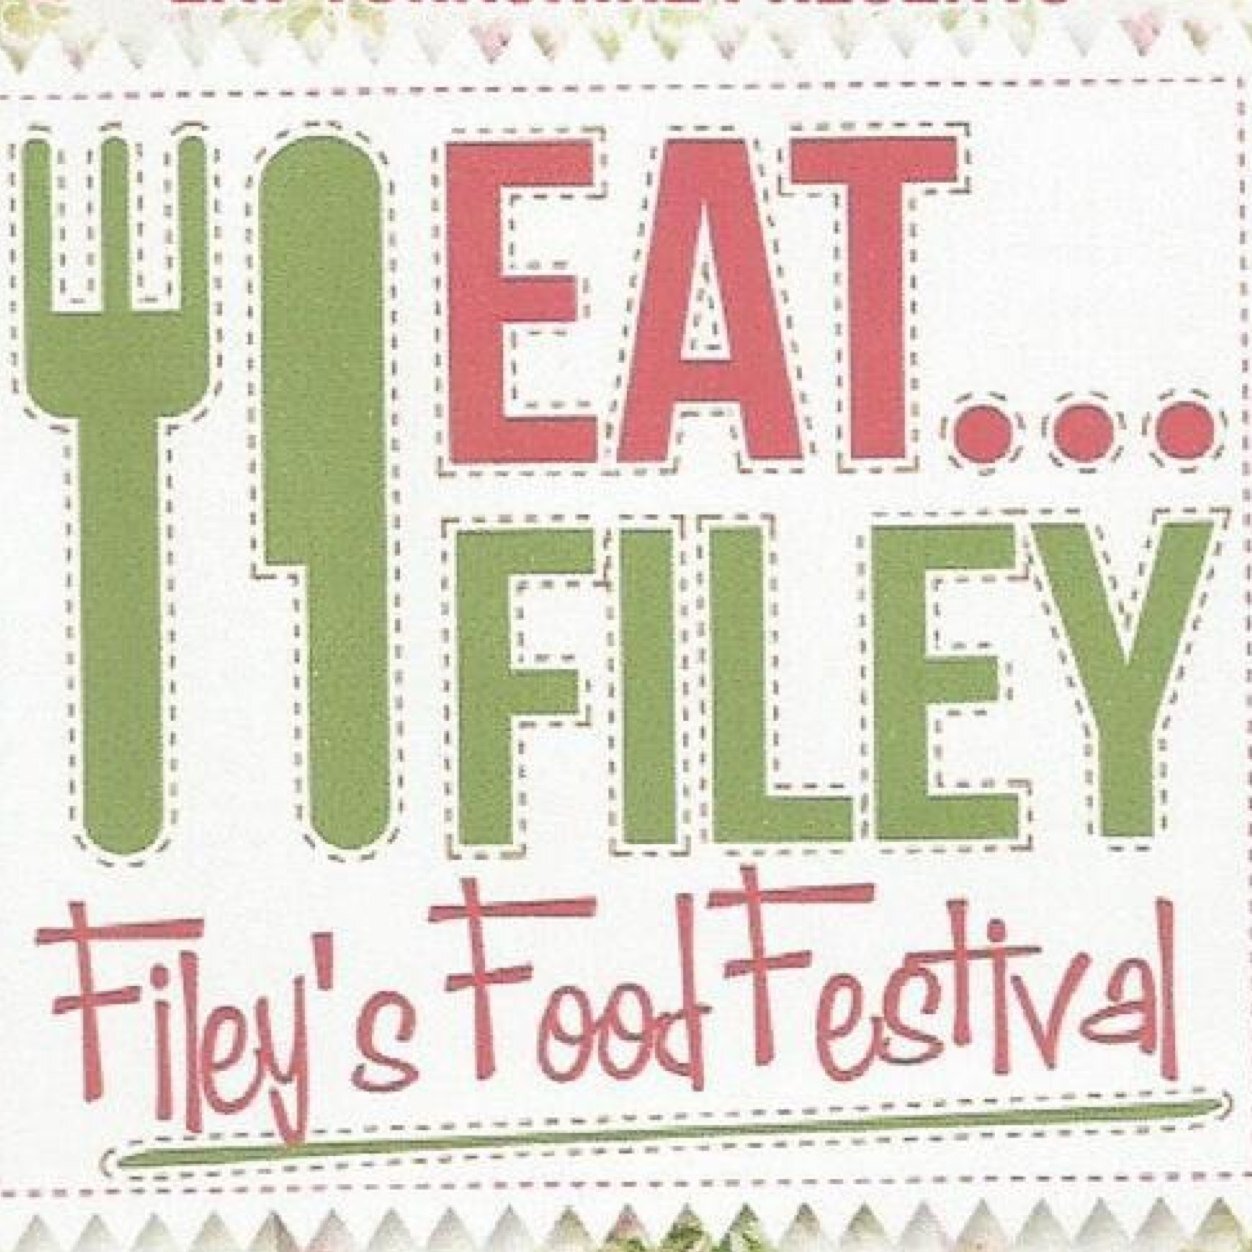 Filey Food Festival - A celebration of great food, free live music and great beer all set on the cliff top overlooking one of the most beautiful bays in the UK